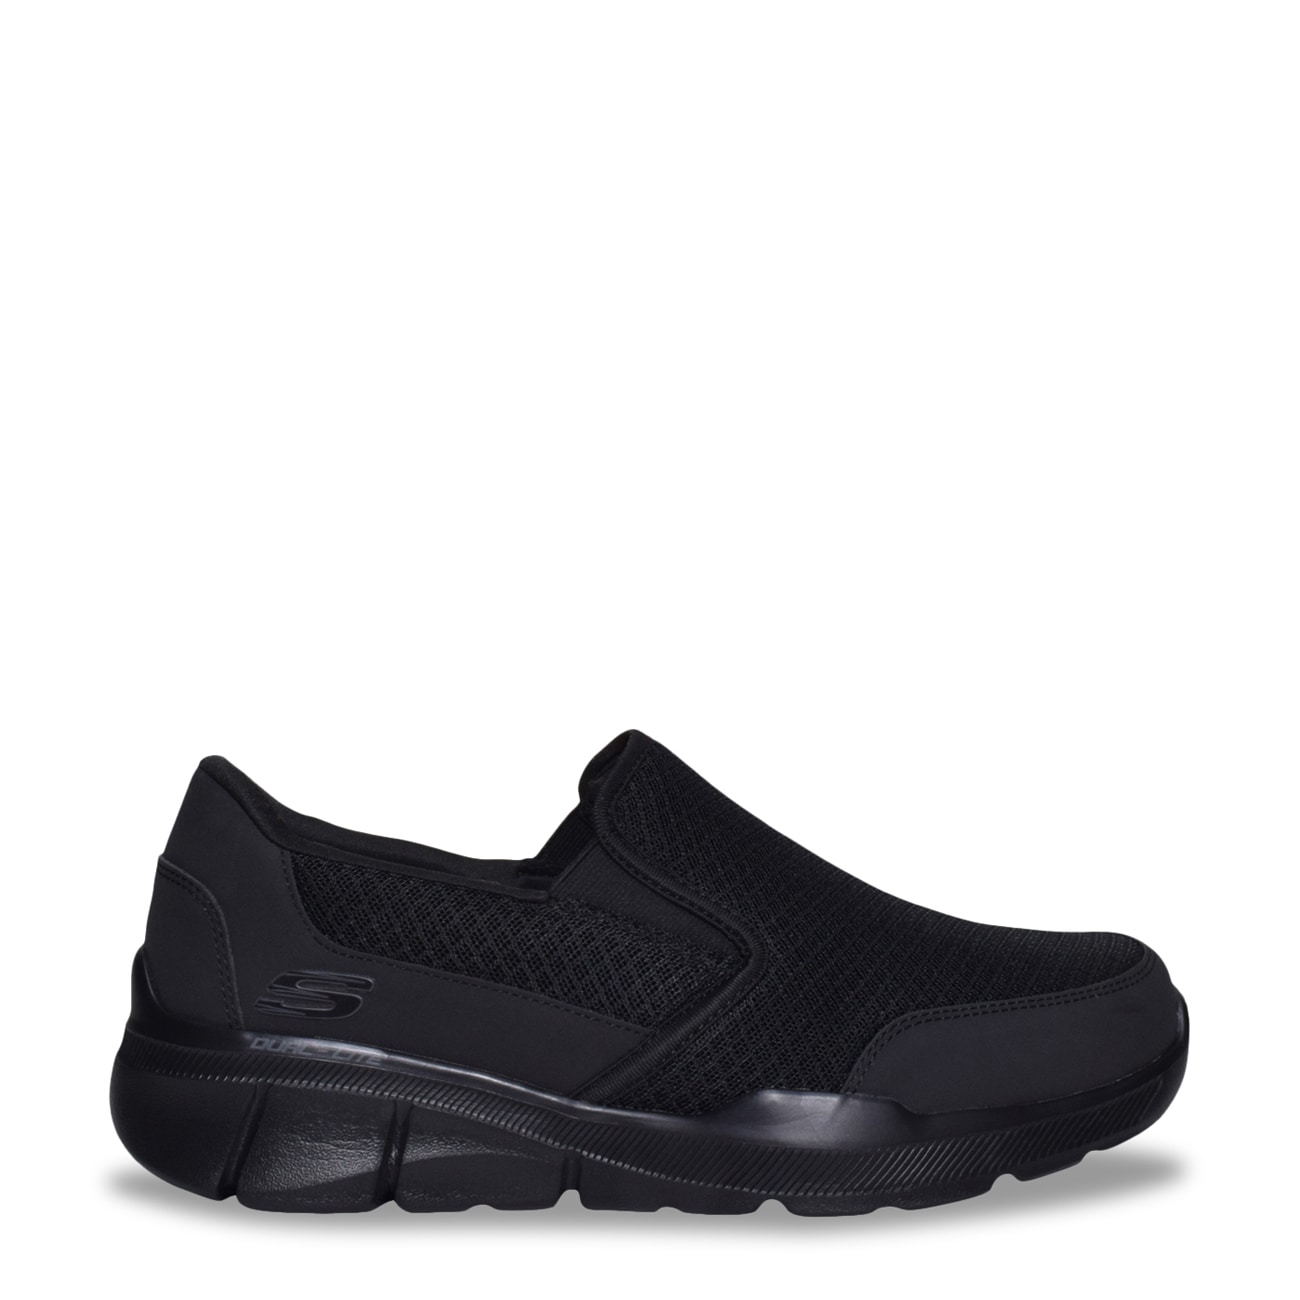 skechers extra wide fit with air cooled memory foam